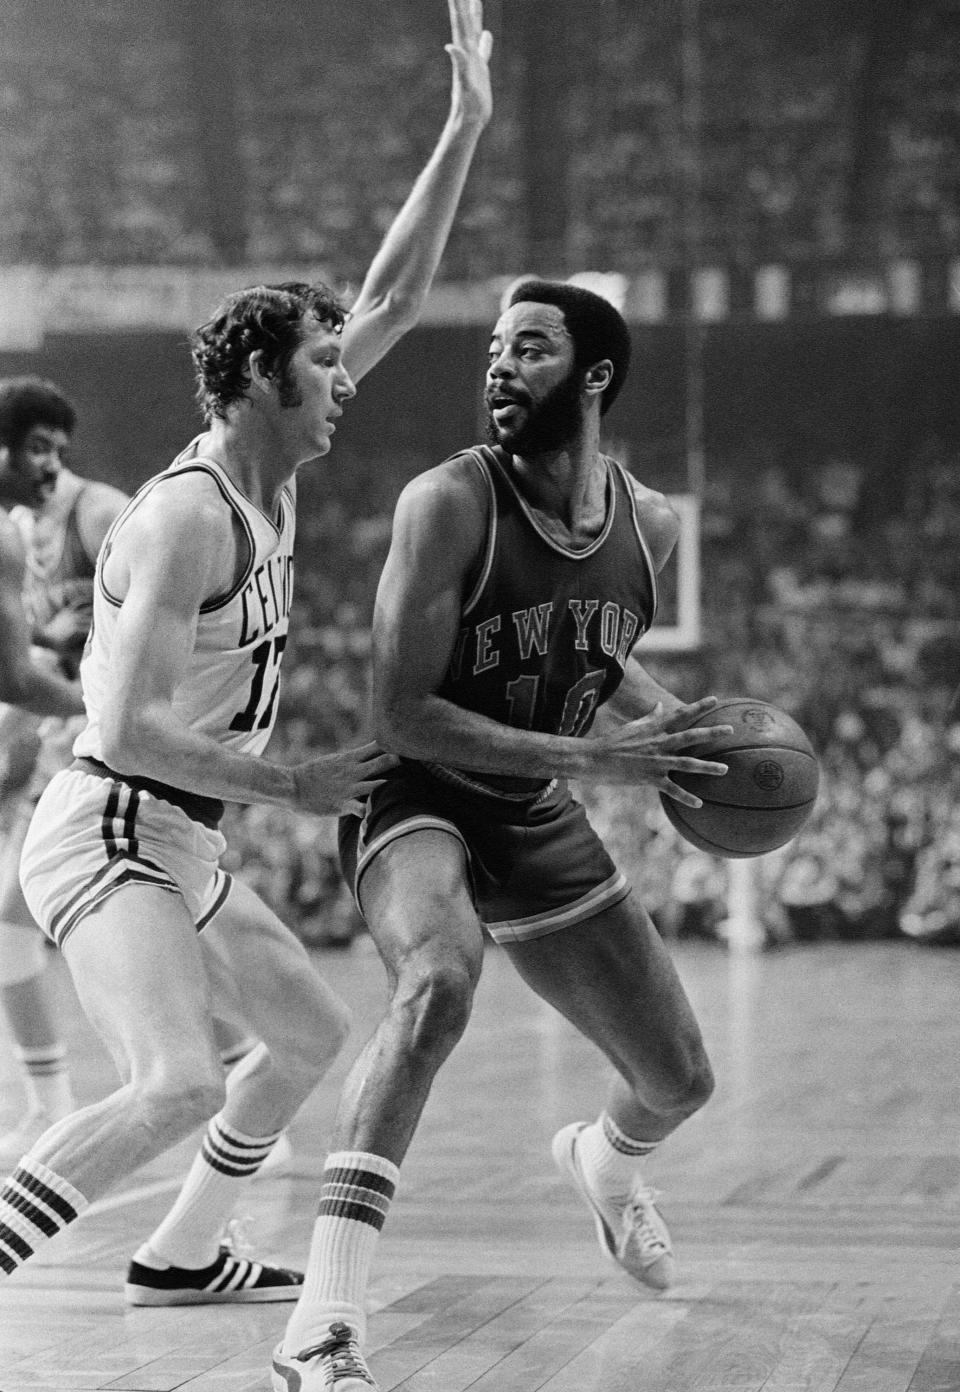 Boston Celtics’ John Havlicek, left, guards New York Knickerbockers’ Walt Frazier trying to make the corner, during their National Basketball Association playoff game on Wednesday, April 26, 1973 in Boston Garden. Havlicek, ailing from an injury to his right shoulder scored 18 points in the game. Boston won 98-97. New York leads the best-of-seven series 3-2. (AP Photo)